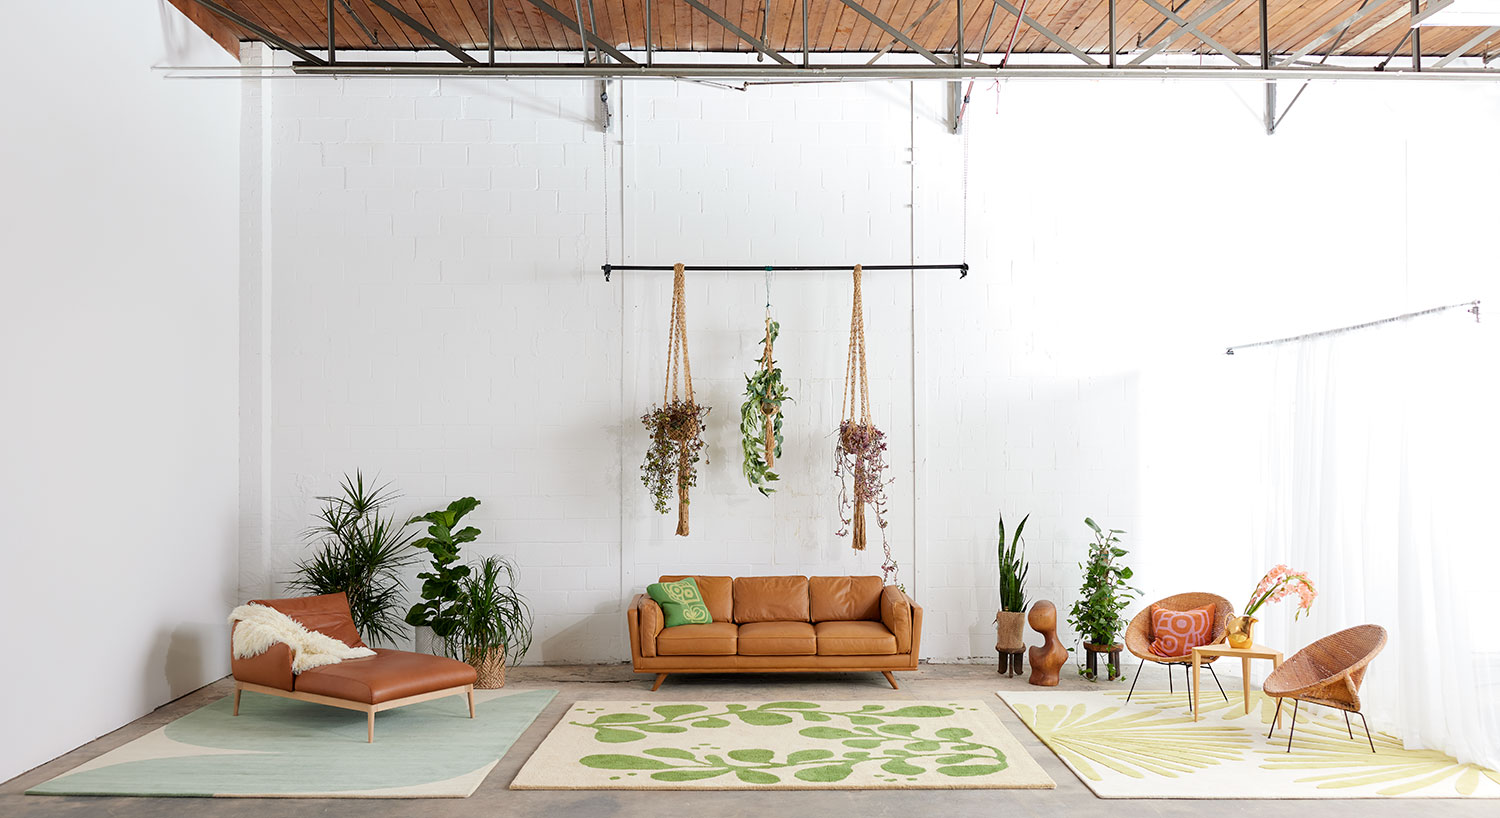 A large room with a brown leather chair, some plants and a neutral and green area rug with abstract designs on it called Vine Mambo